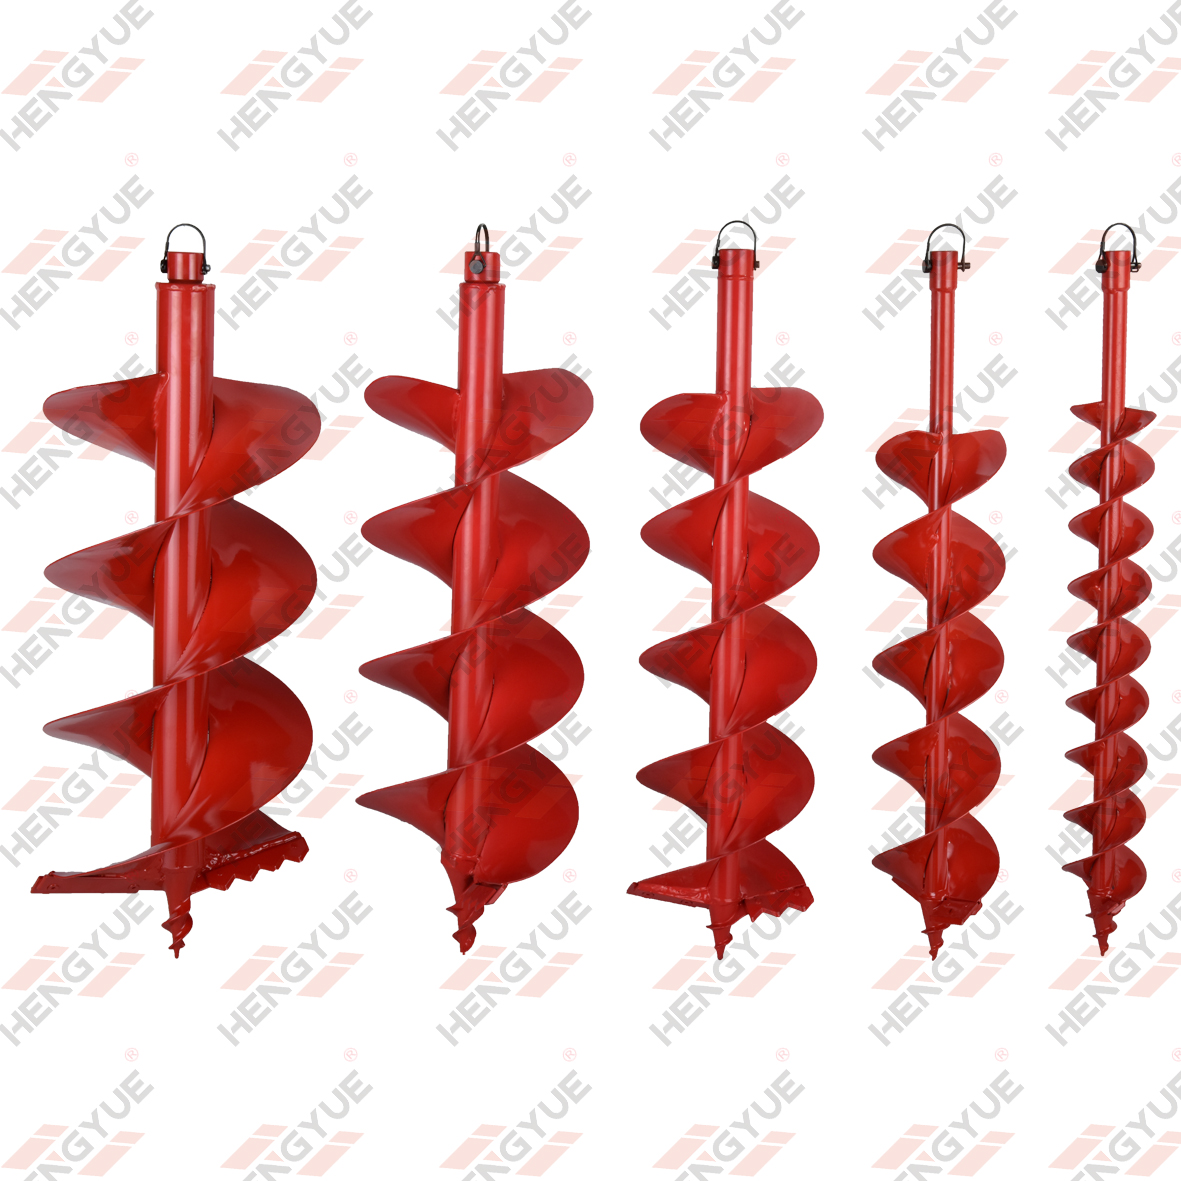 Quality & Professional earth auger bits for Hand held earth auger machine 